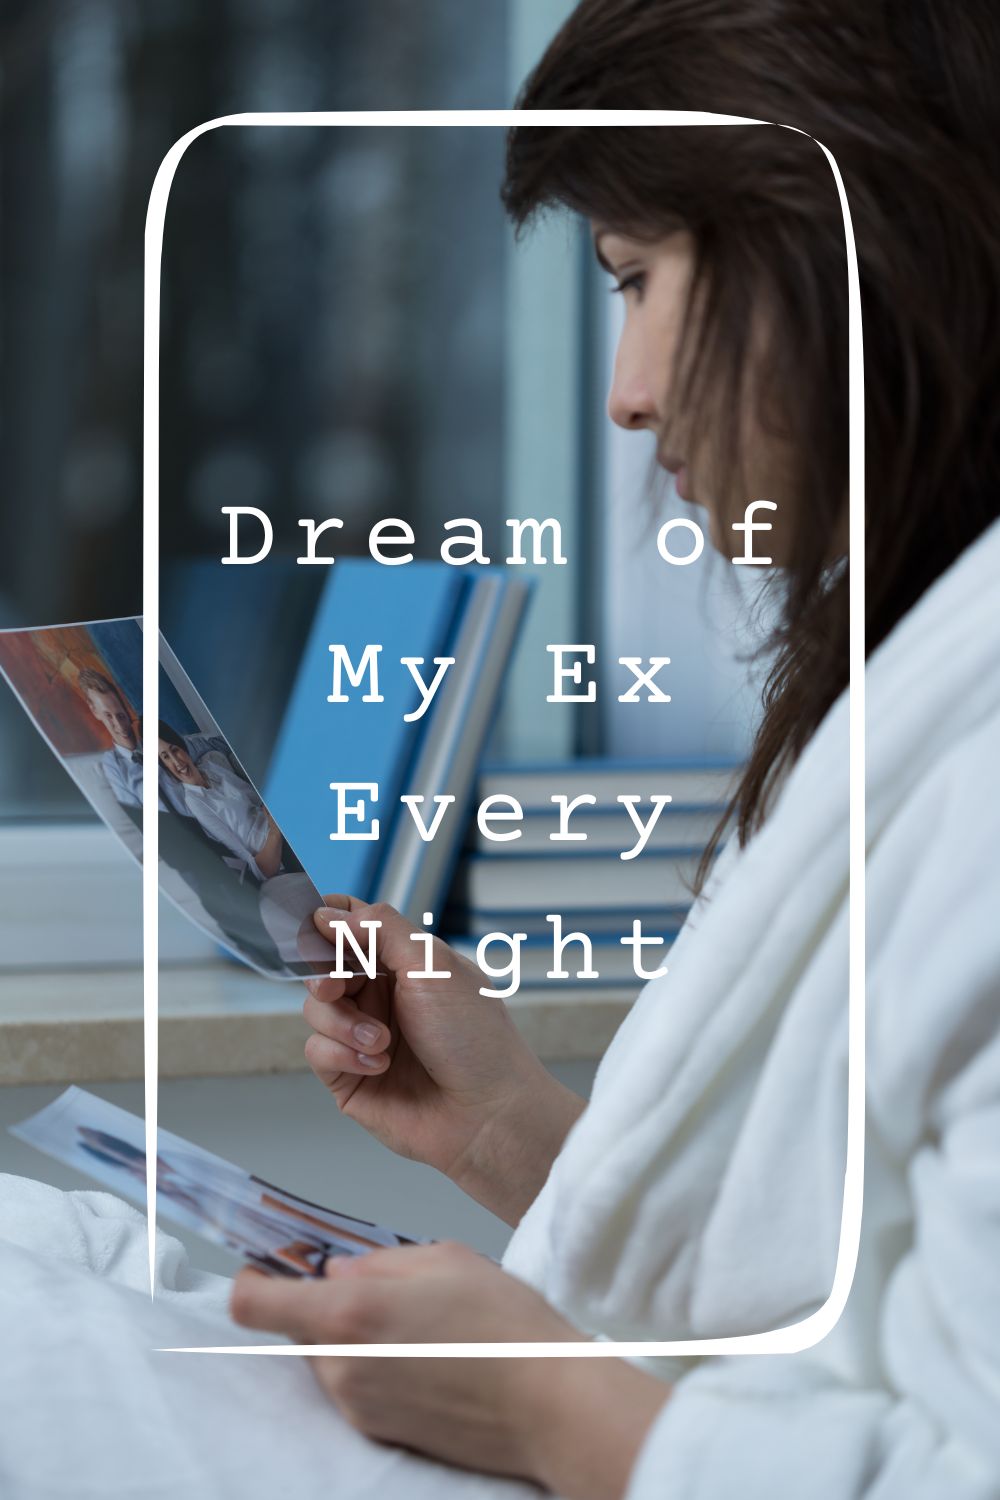 8 Dream of My Ex Every Night Meanings1